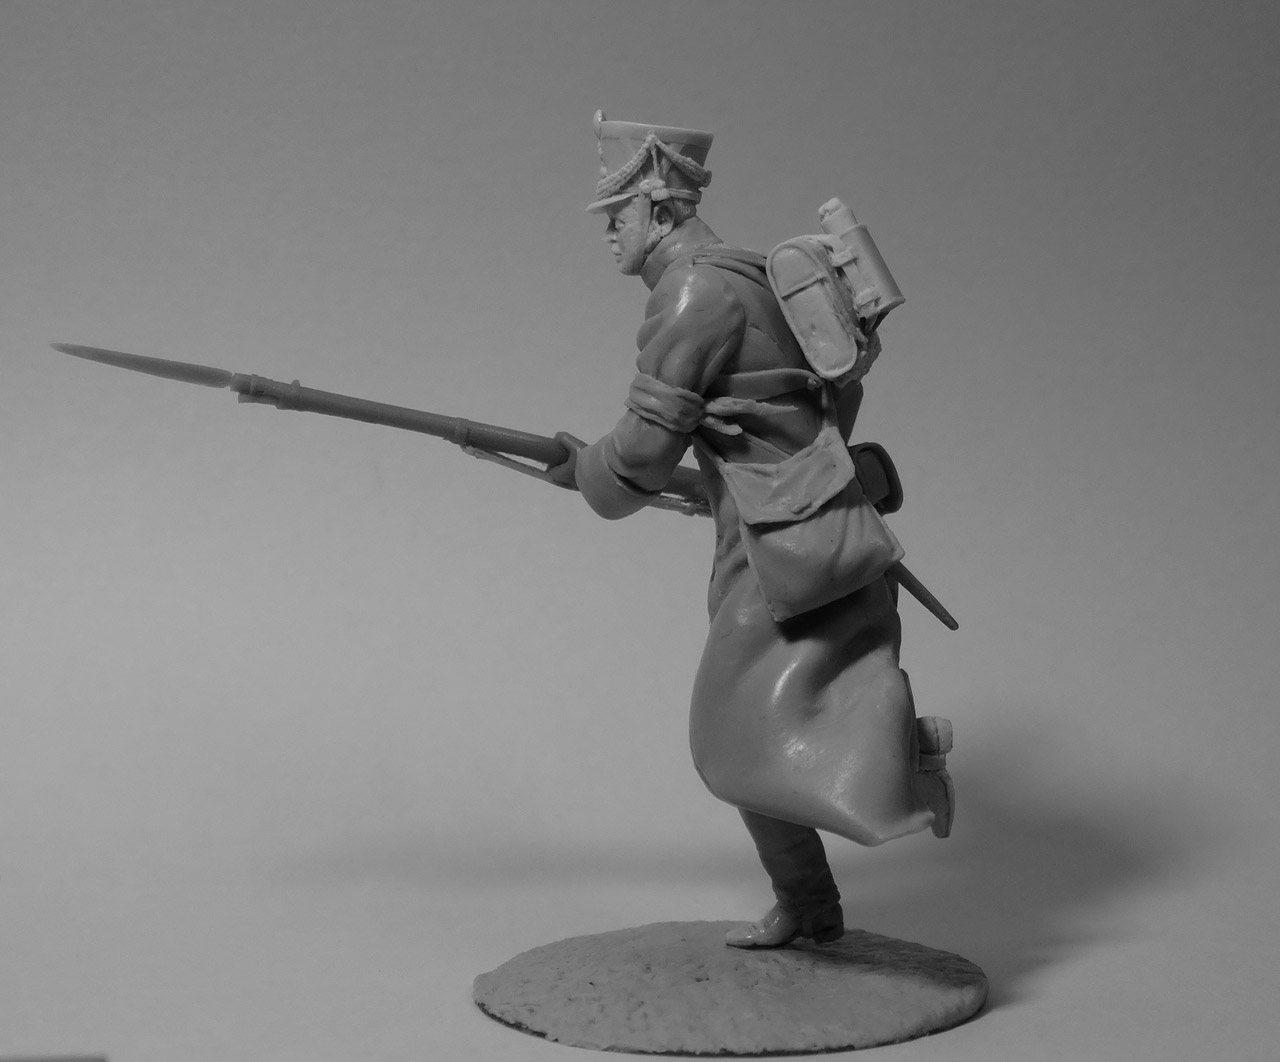 Sculpture: Private, 19th chasseurs, in winter uniform, March 1814, photo #4